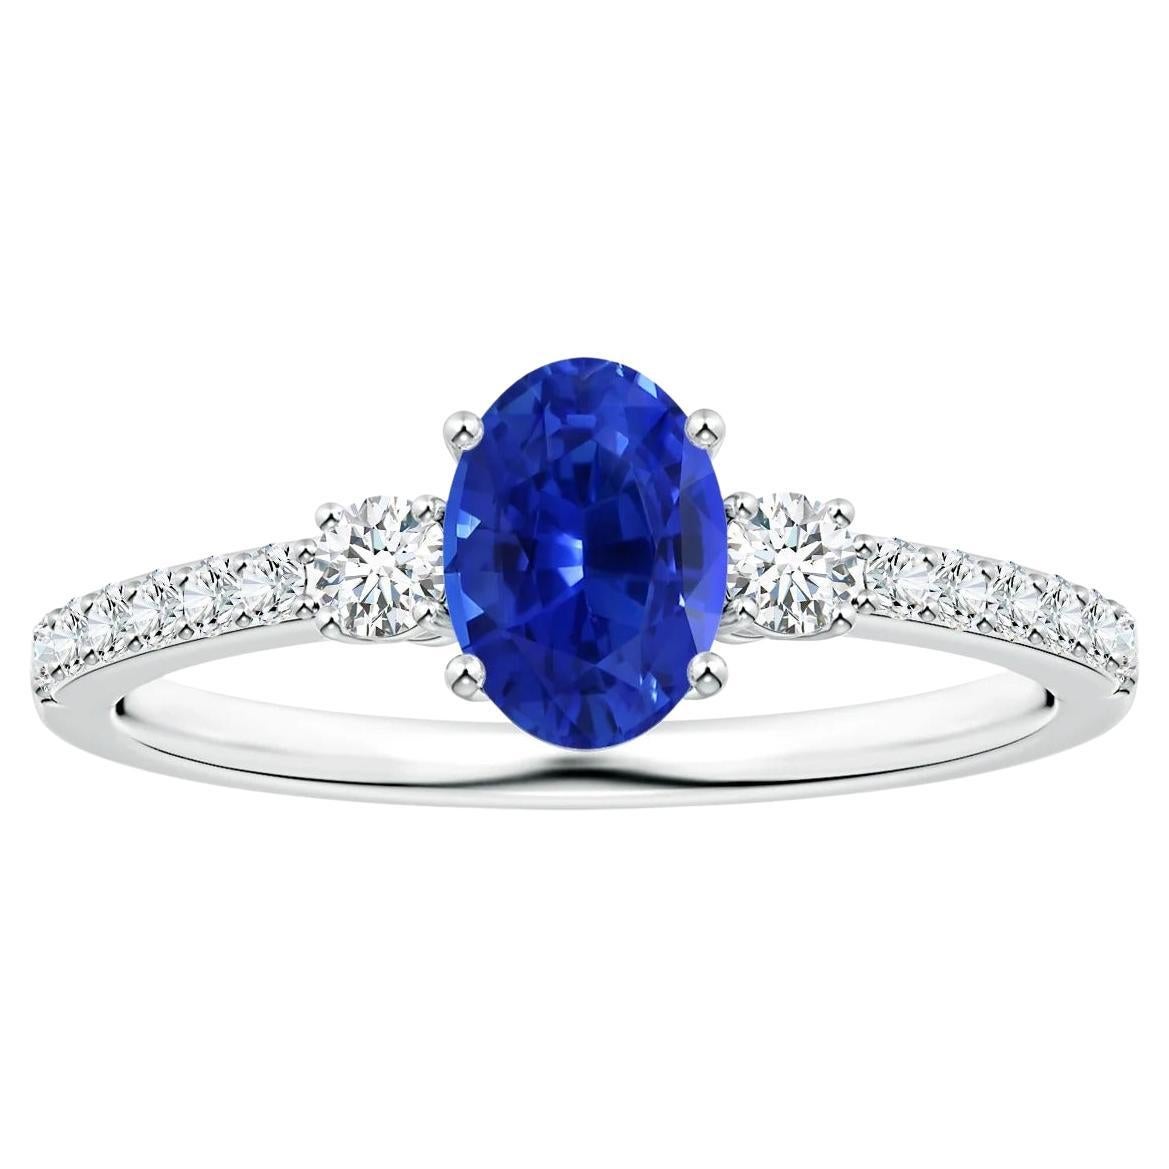 For Sale:  Angara Gia Certified Natural Blue Sapphire & Diamond 3-Stone Ring in White Gold